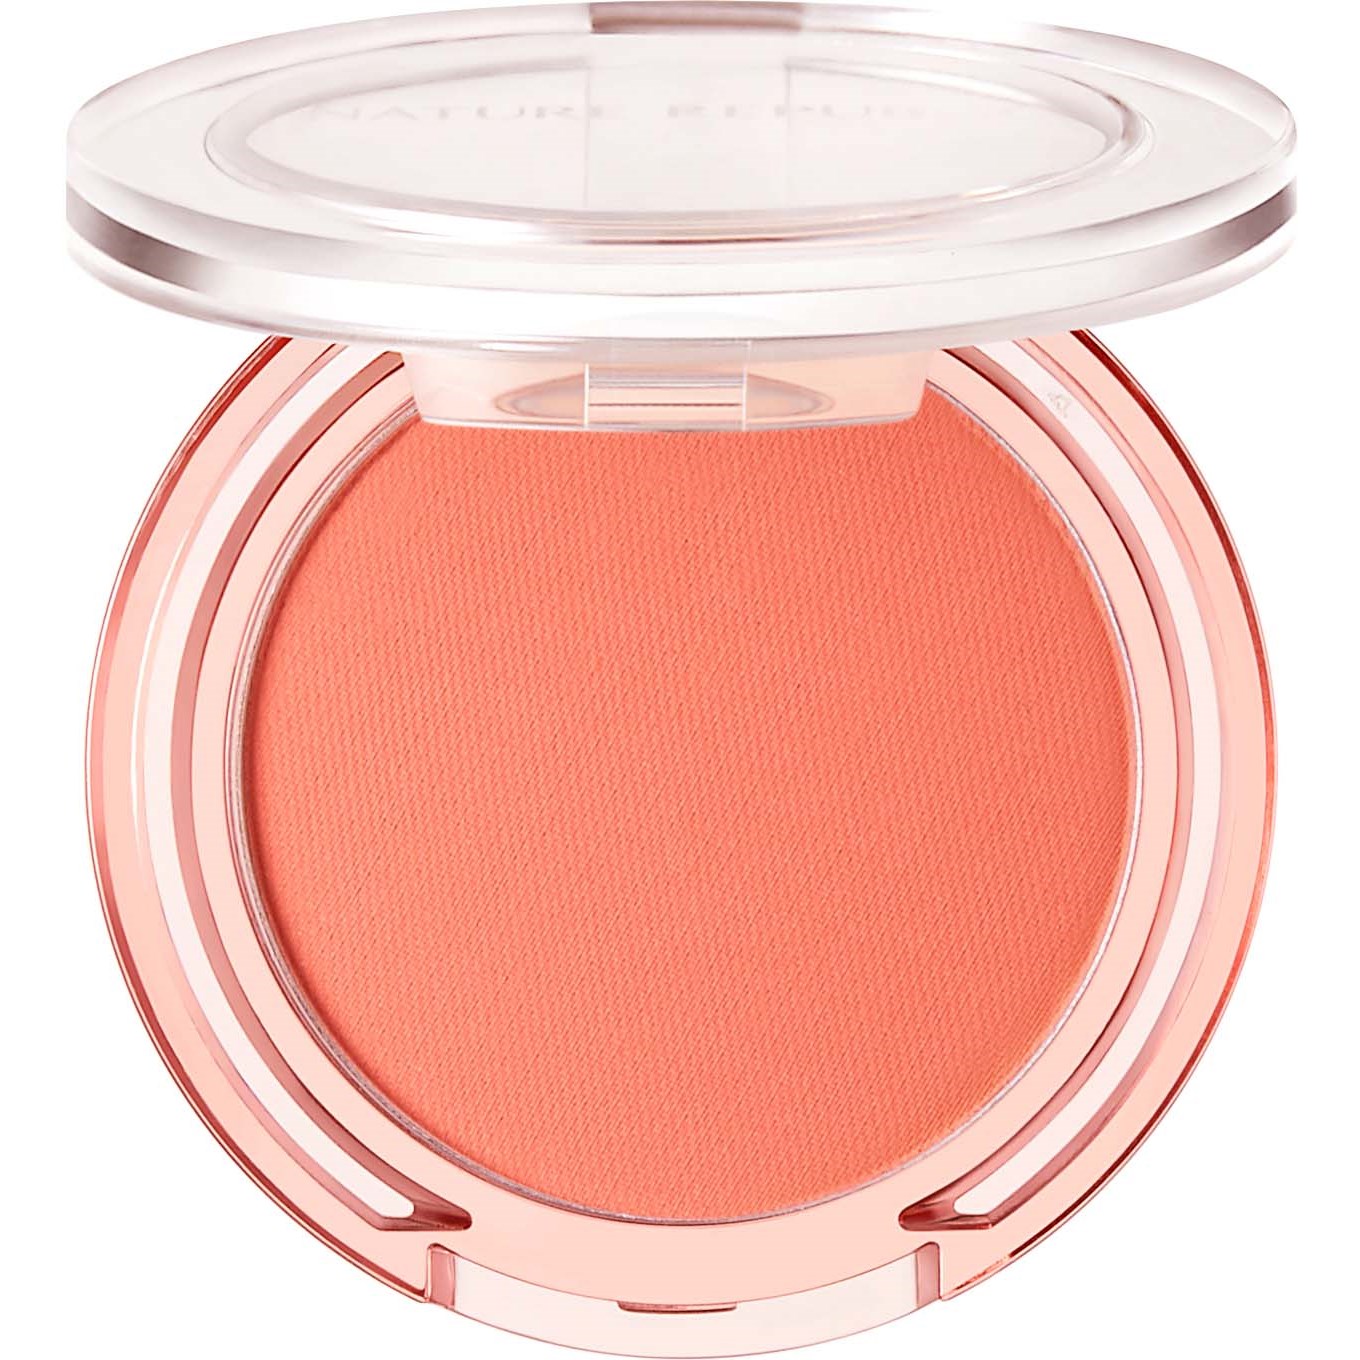 Nature Republic By Flower Blusher 03 Grapefruit Cotton Candy